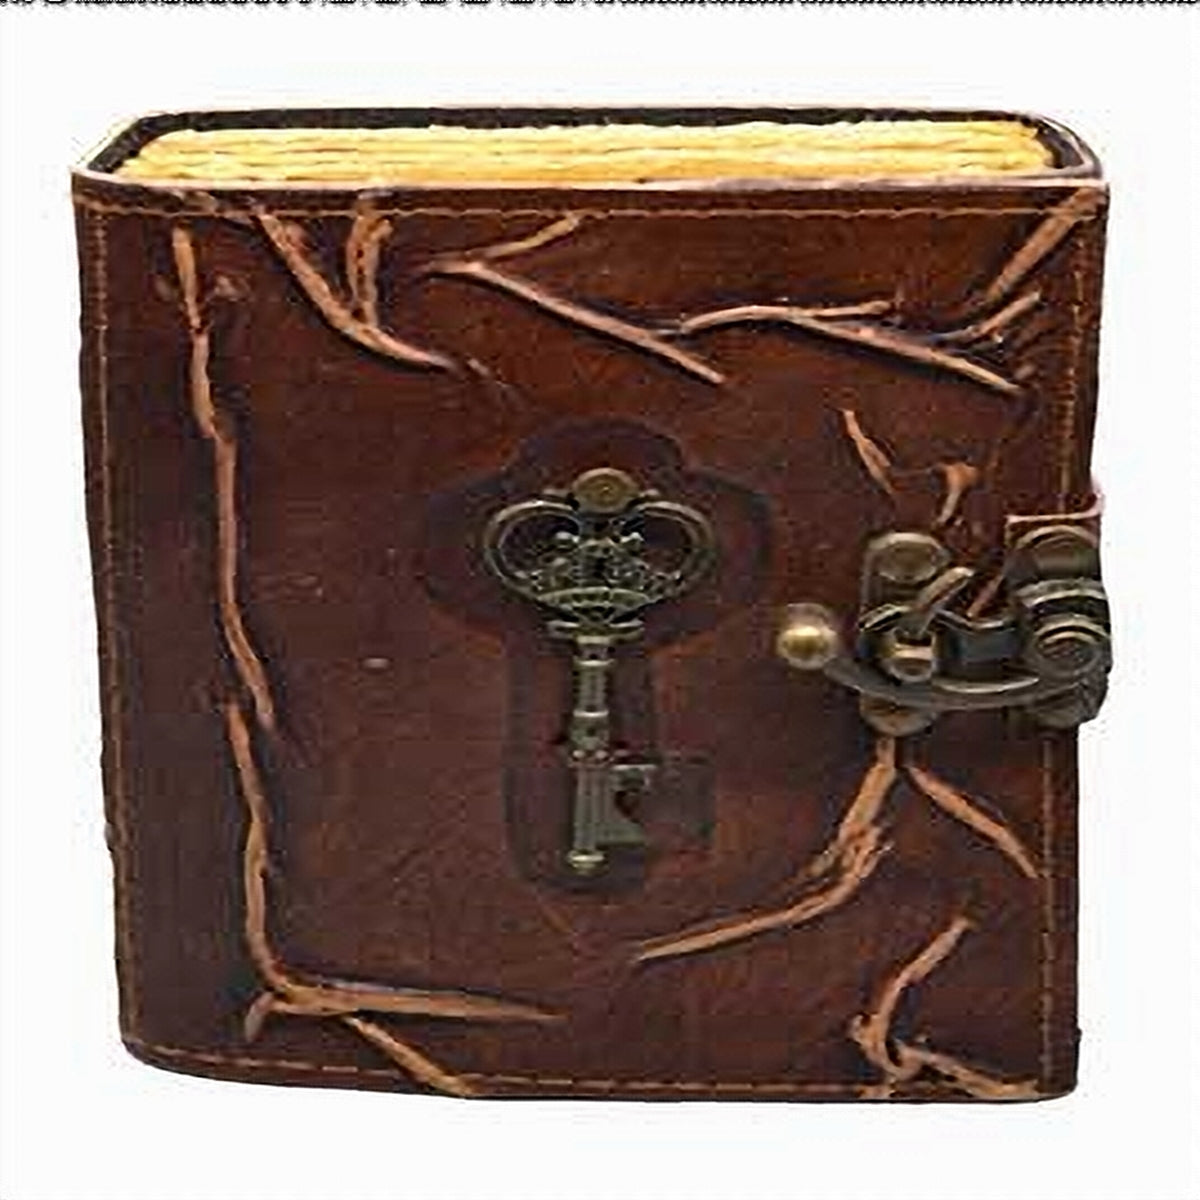 Key Leather Journal with Latch